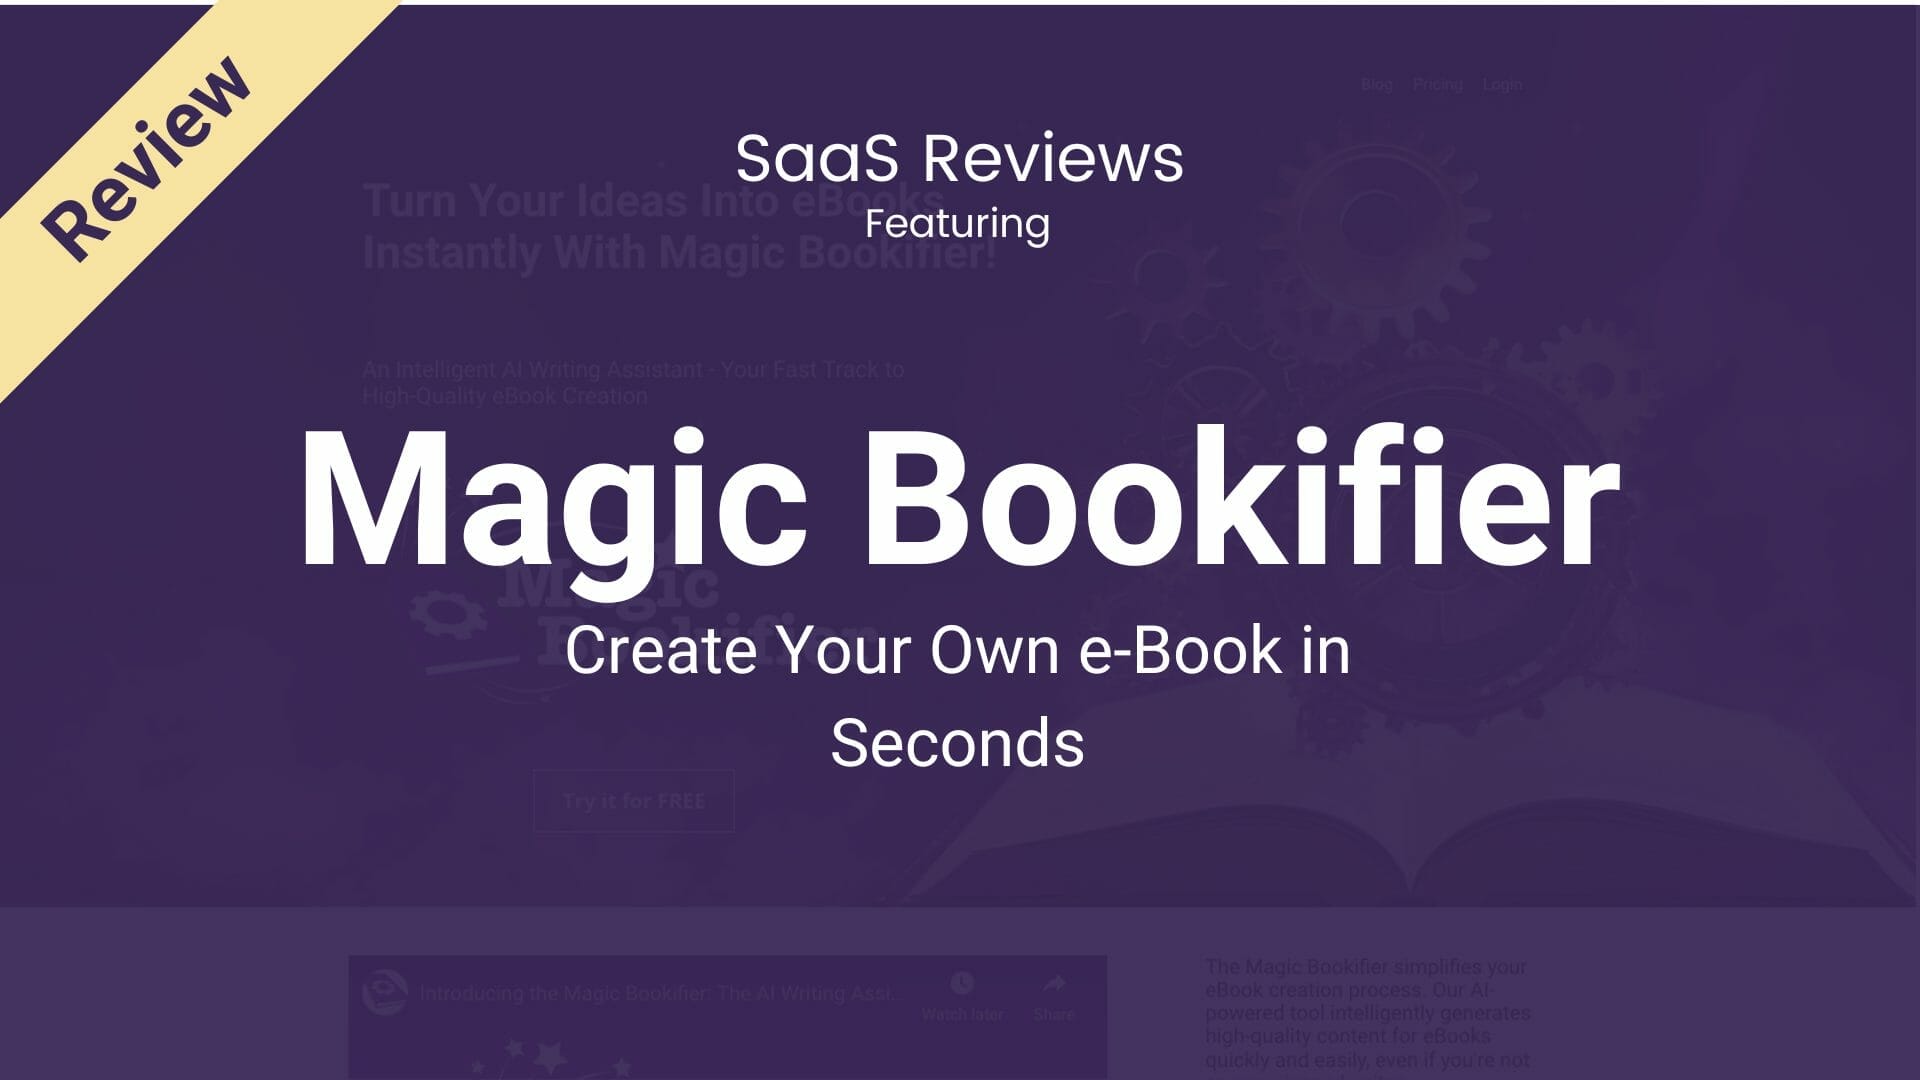 Magic Bookifier Review: Create Your Own E-Book in Seconds